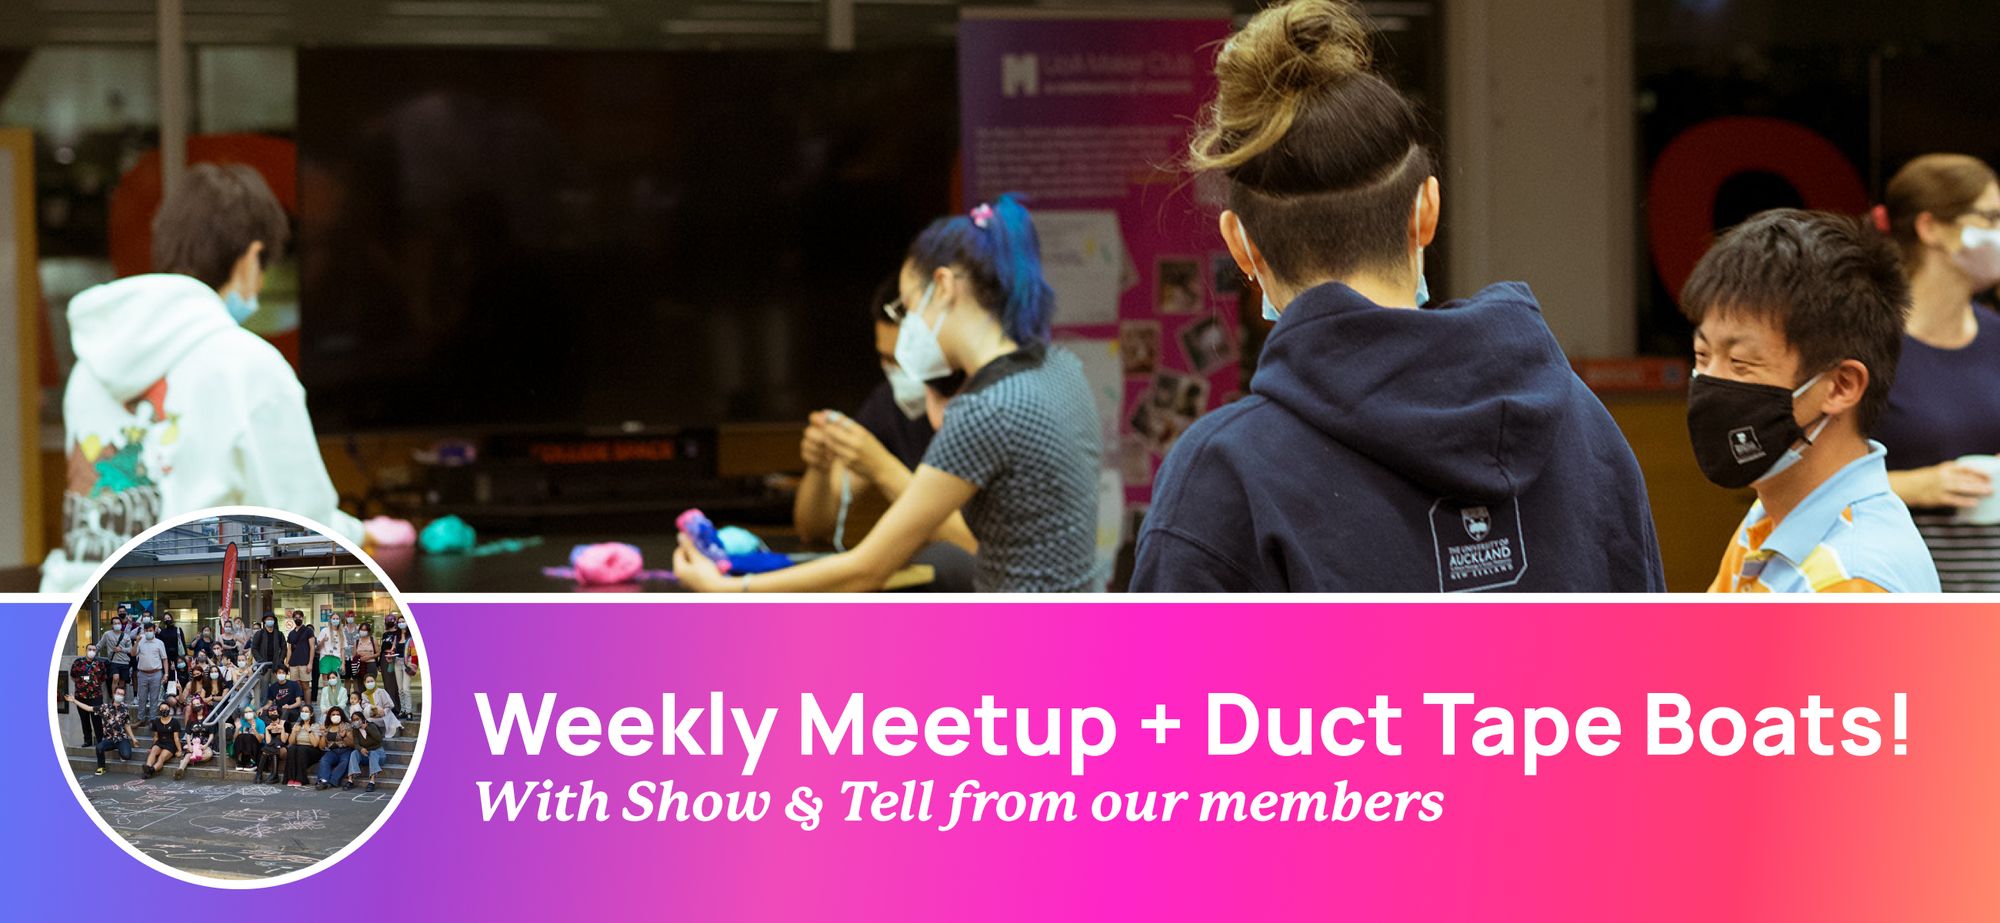 Friday 18th: Weekly Meetup + Duct Tape Boats!